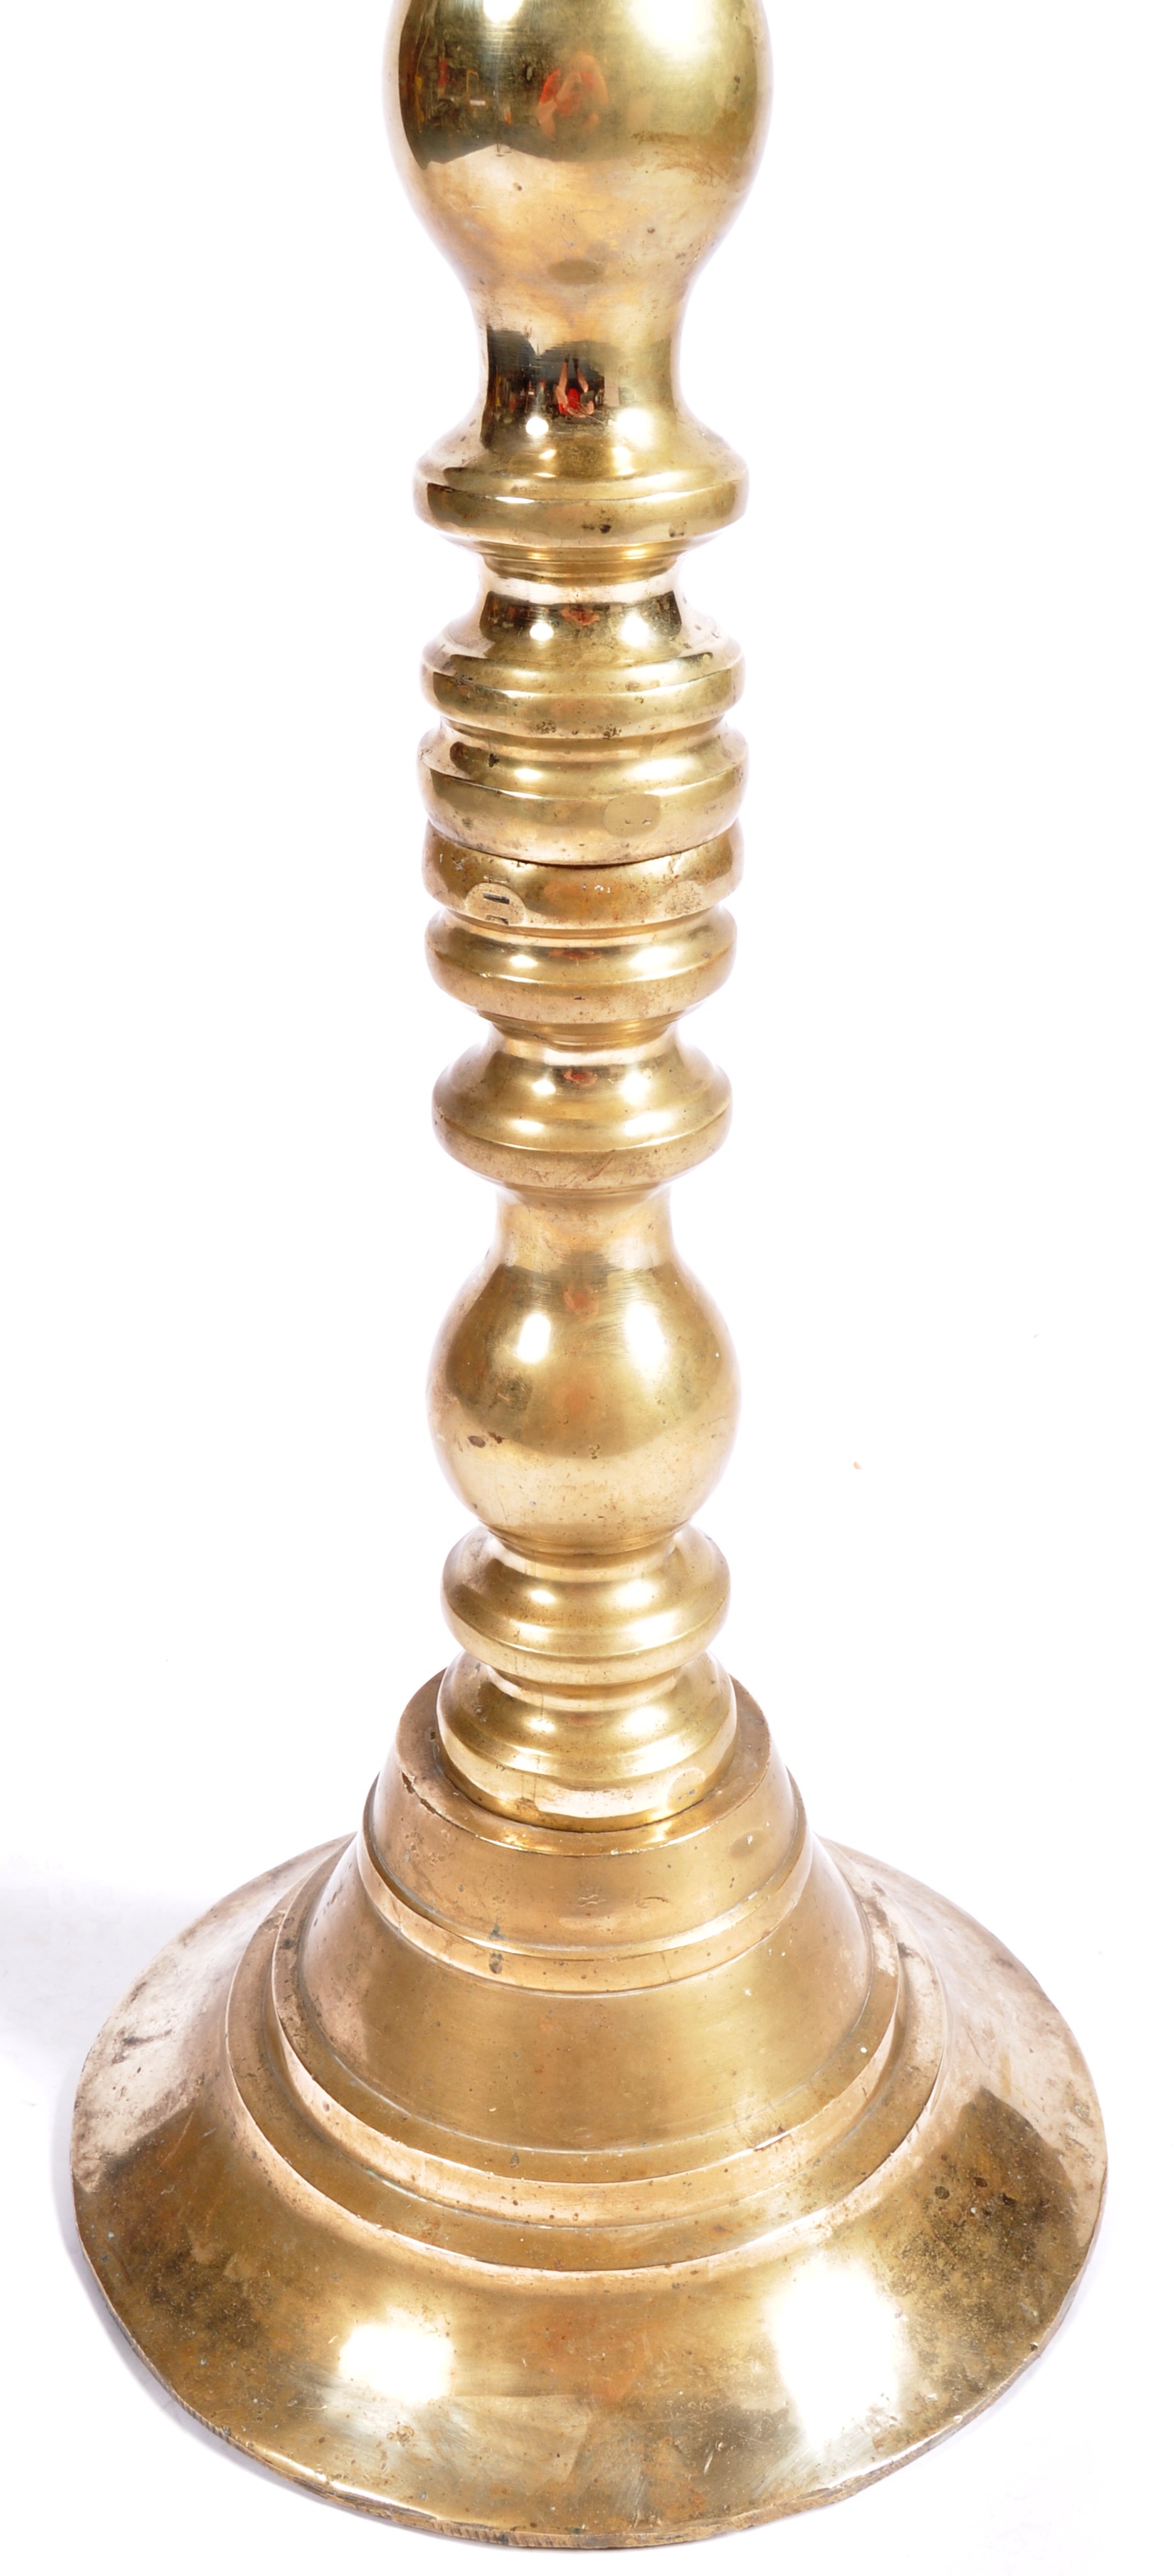 LARGE HEAVY FLOOR STANDING DUTCH CANDLESTICK - Image 4 of 6